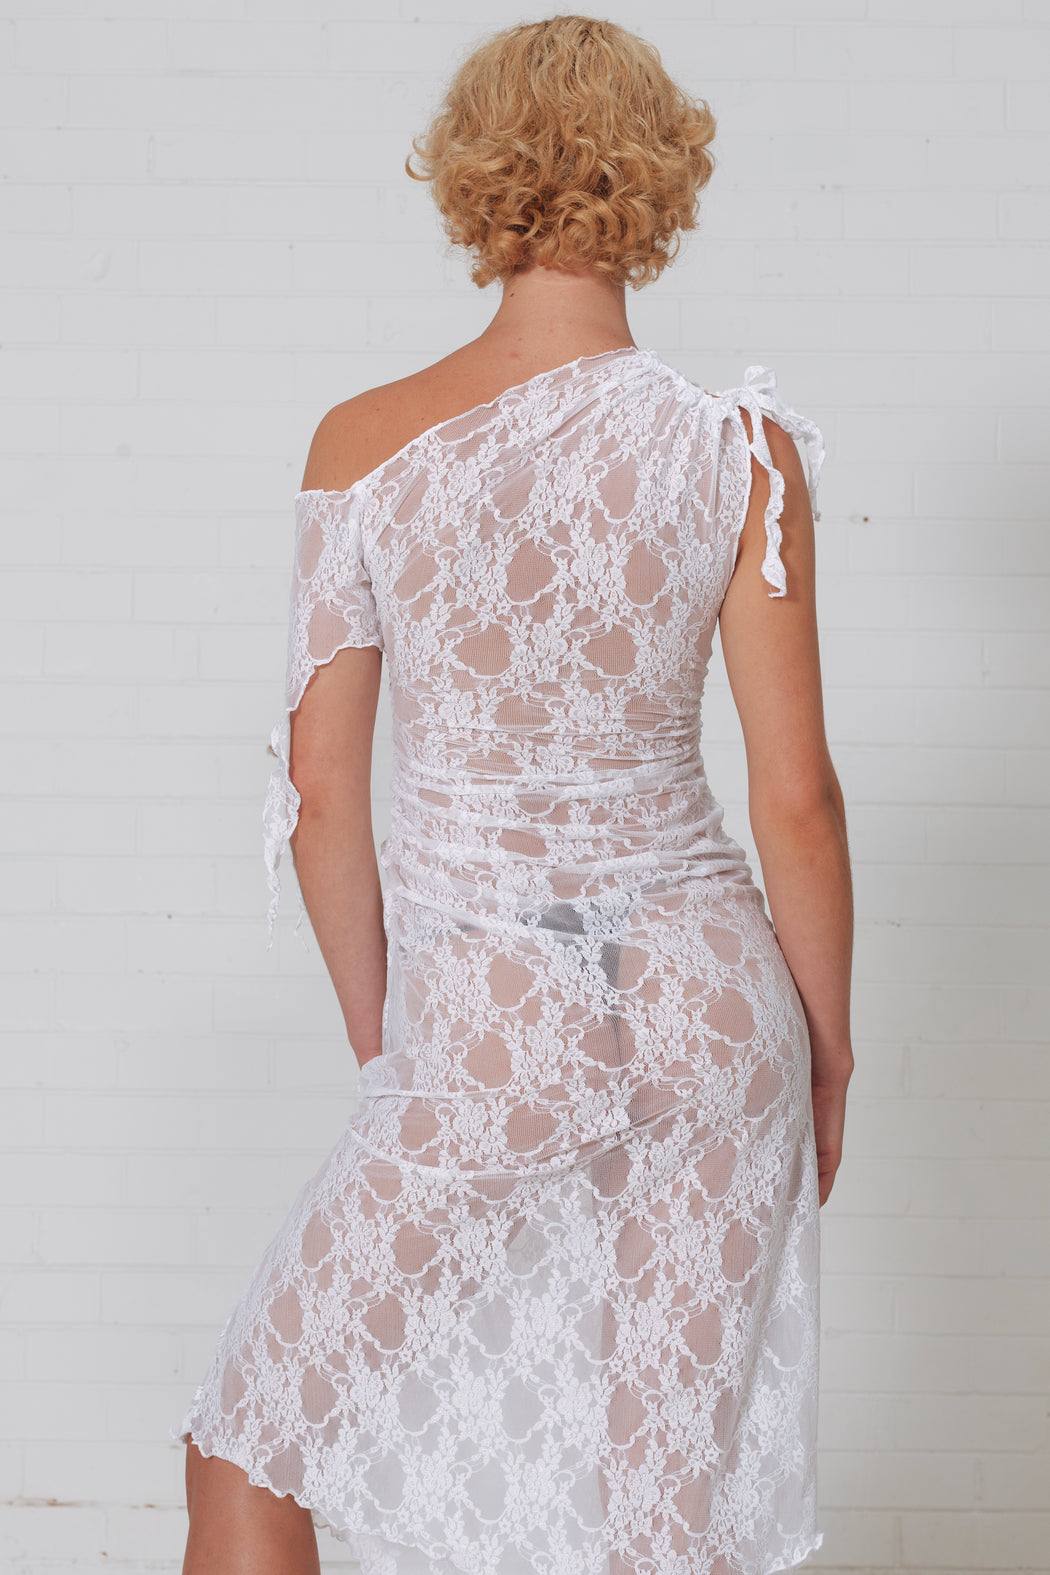 WHITE LACE SUMMER DRESS